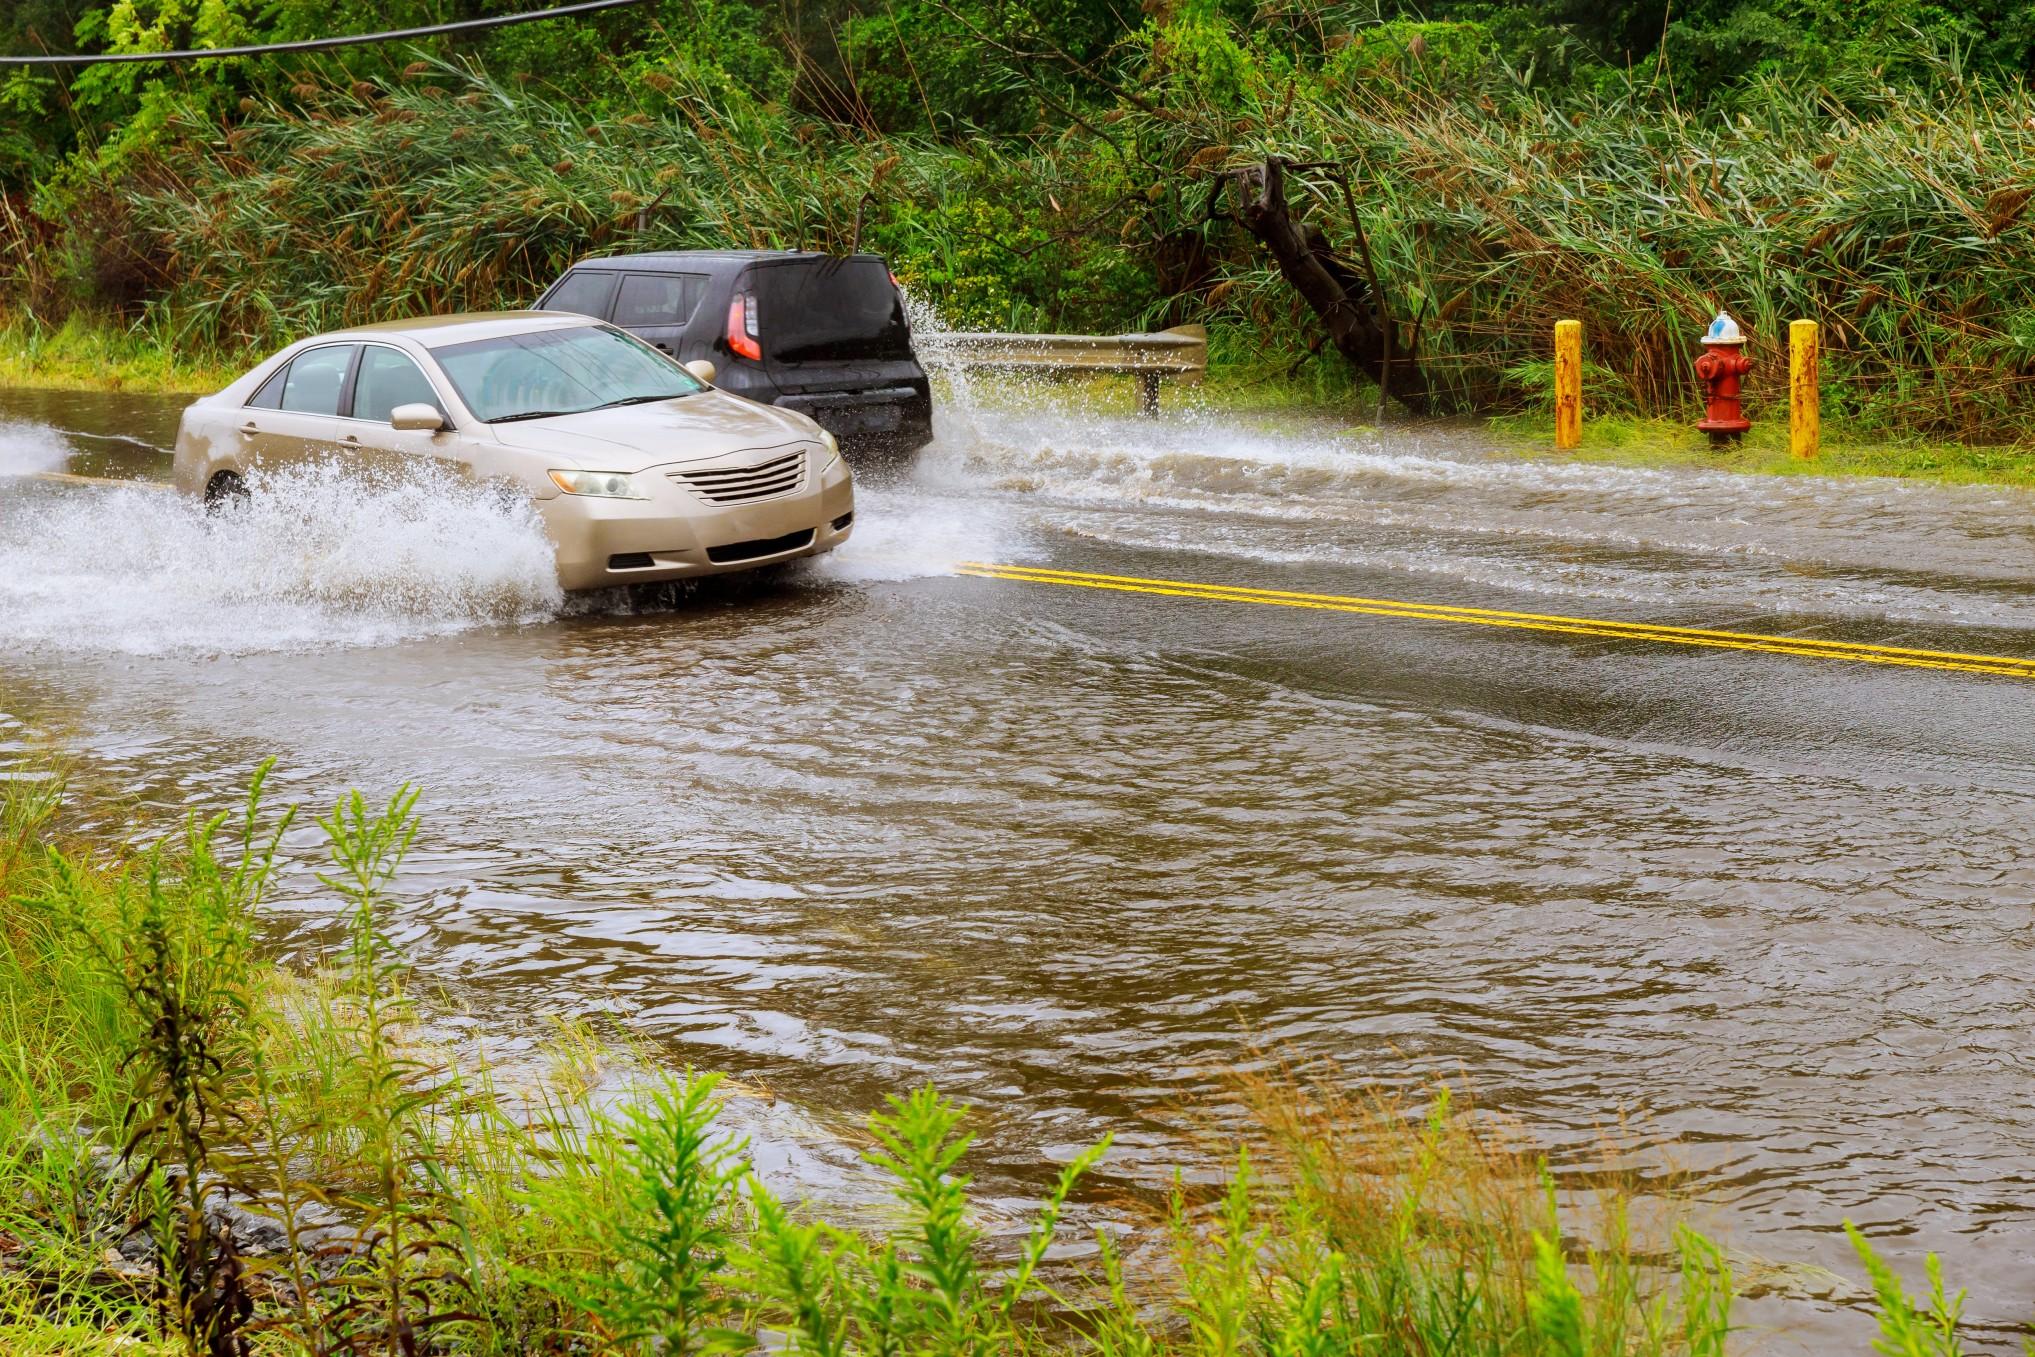 With hurricane season, there is usually an increase in flood-damage car insurance claims.